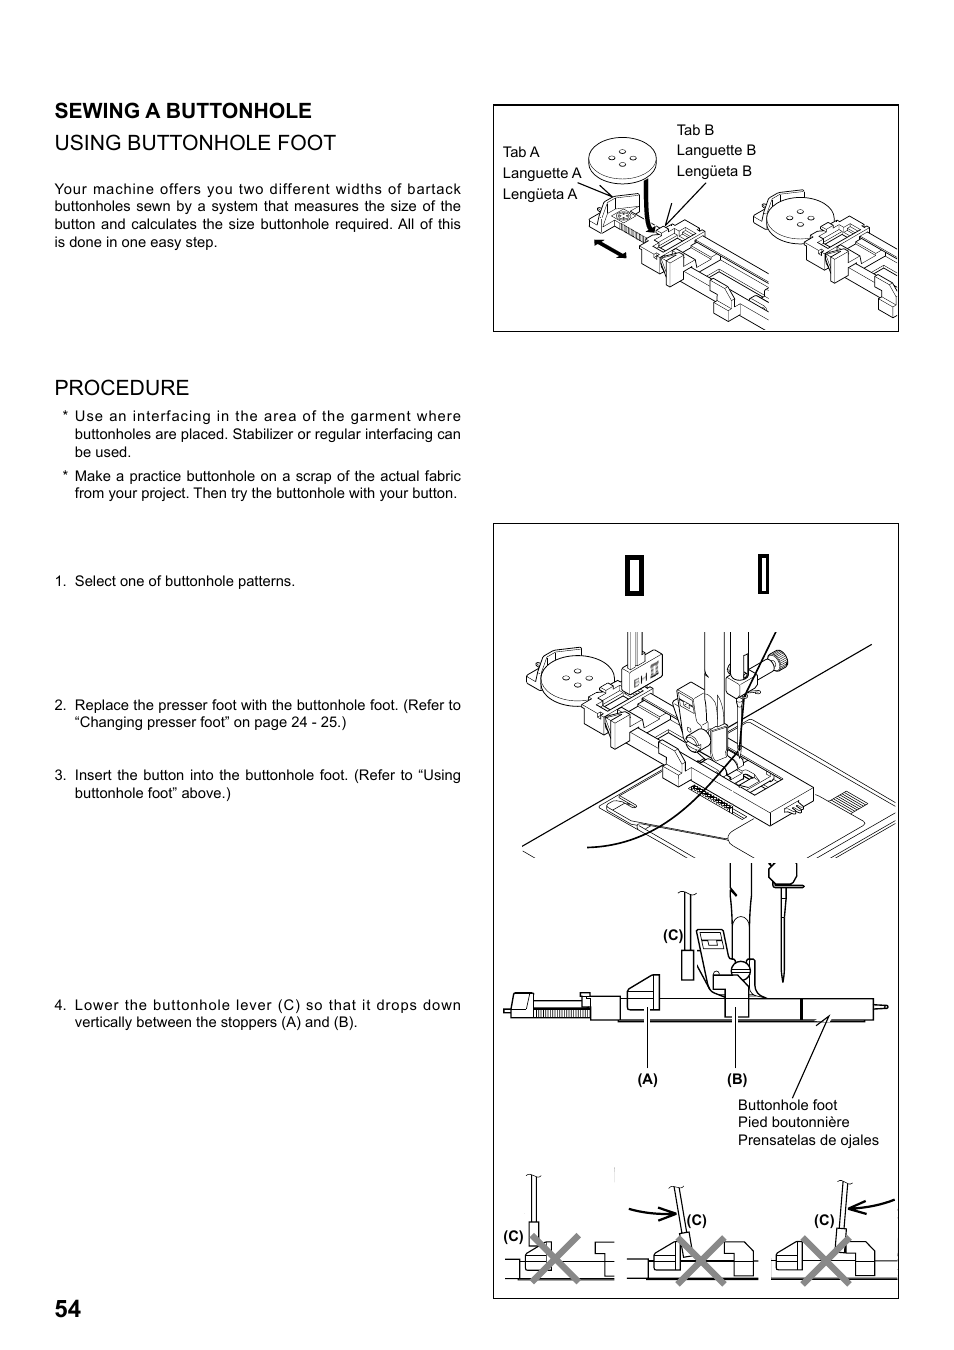 Sewing a buttonhole using buttonhole foot, Procedure | SINGER 8763 CURVY User Manual | Page 54 / 68